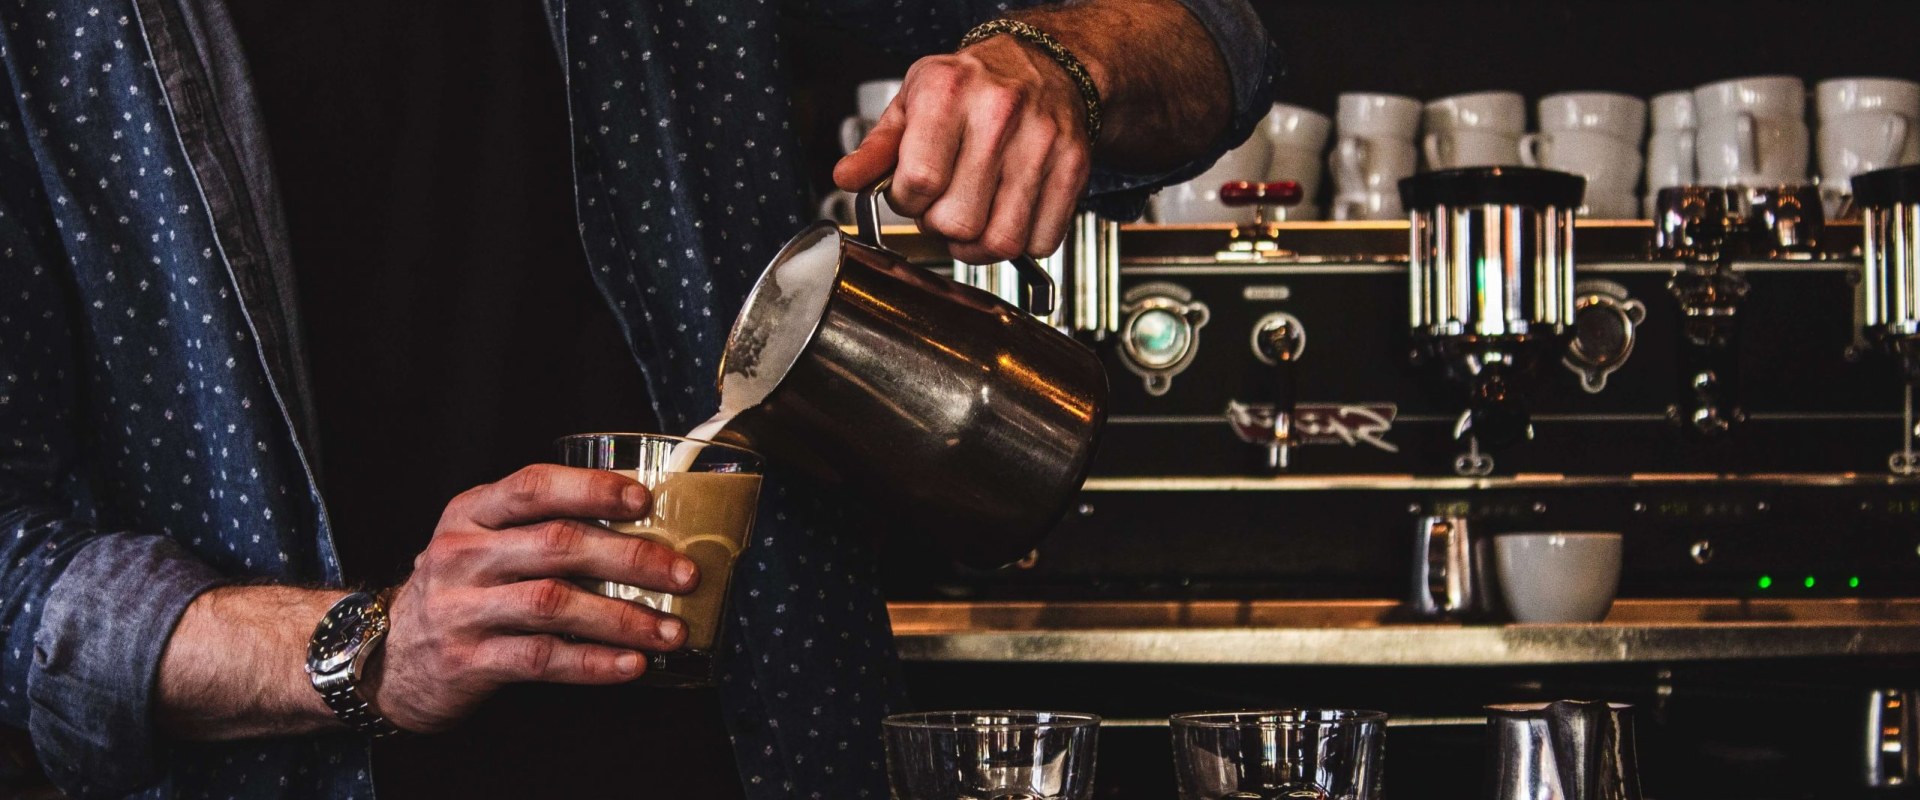 Can Bartenders and Baristas Work Together?